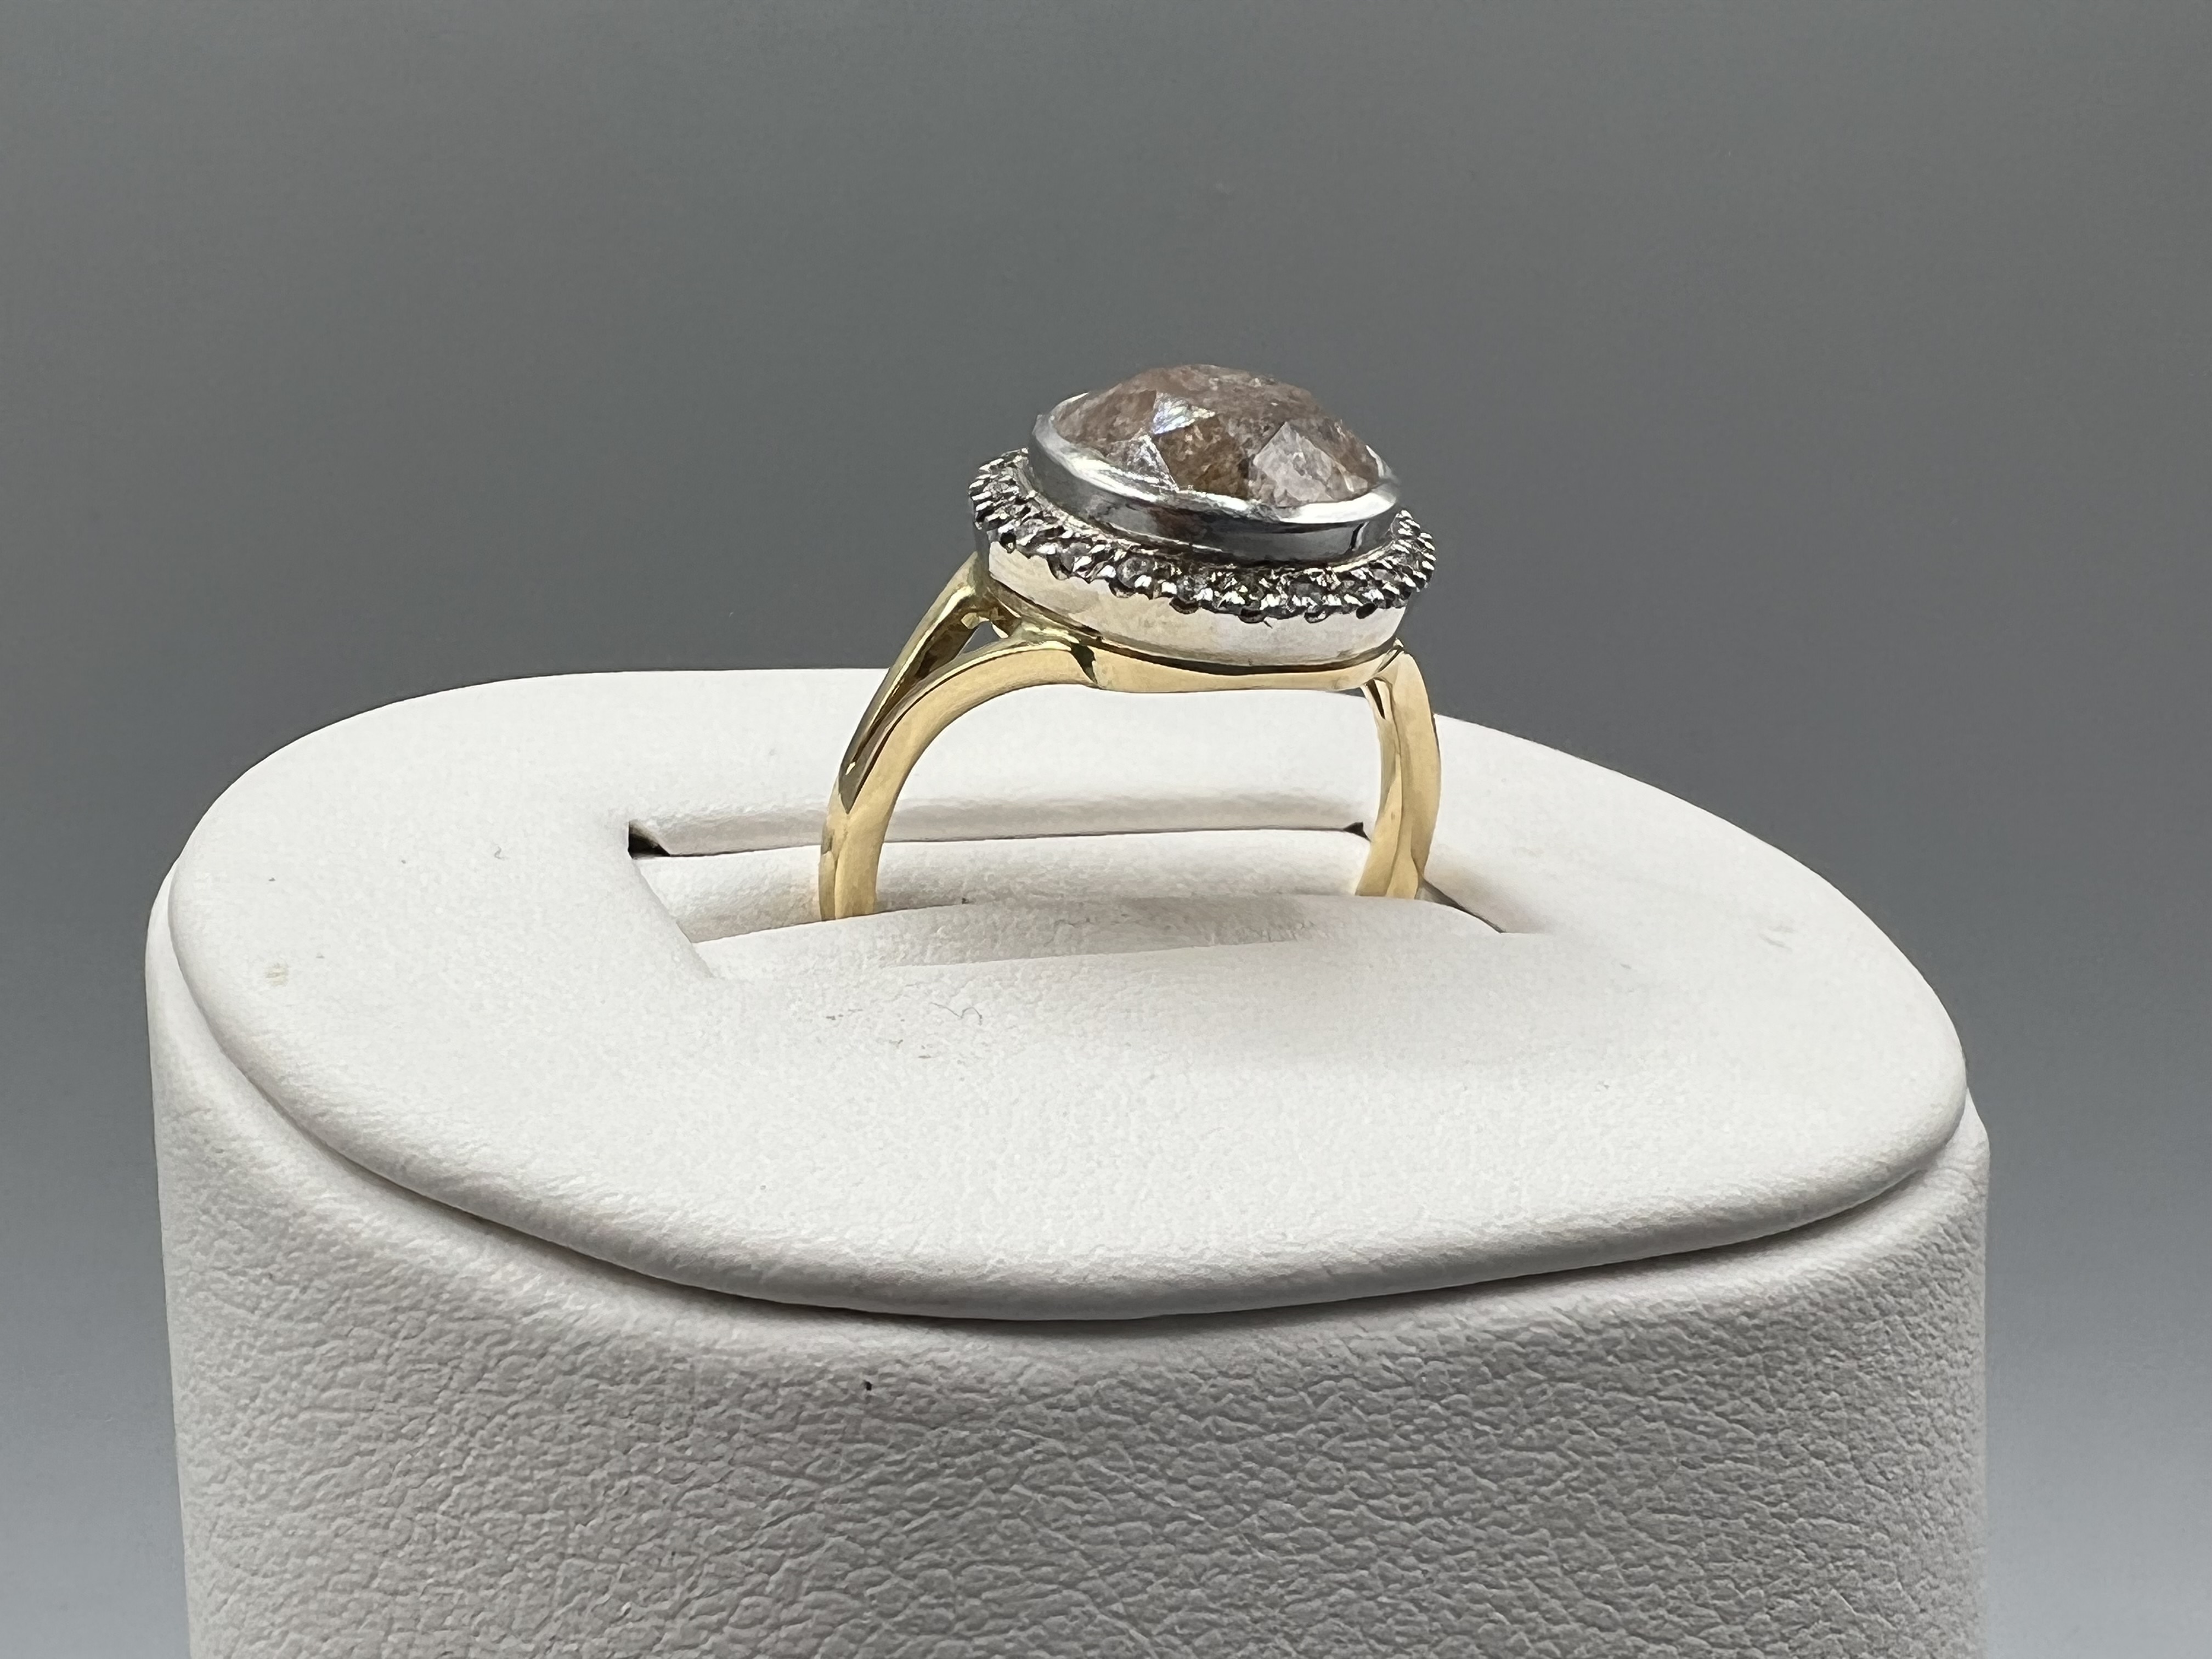 3.77ct Natural Round Brilliant Cut Diamond Solitaire Ring with Halo Mount in 18ct Gold - Size N 1/ - Image 3 of 3